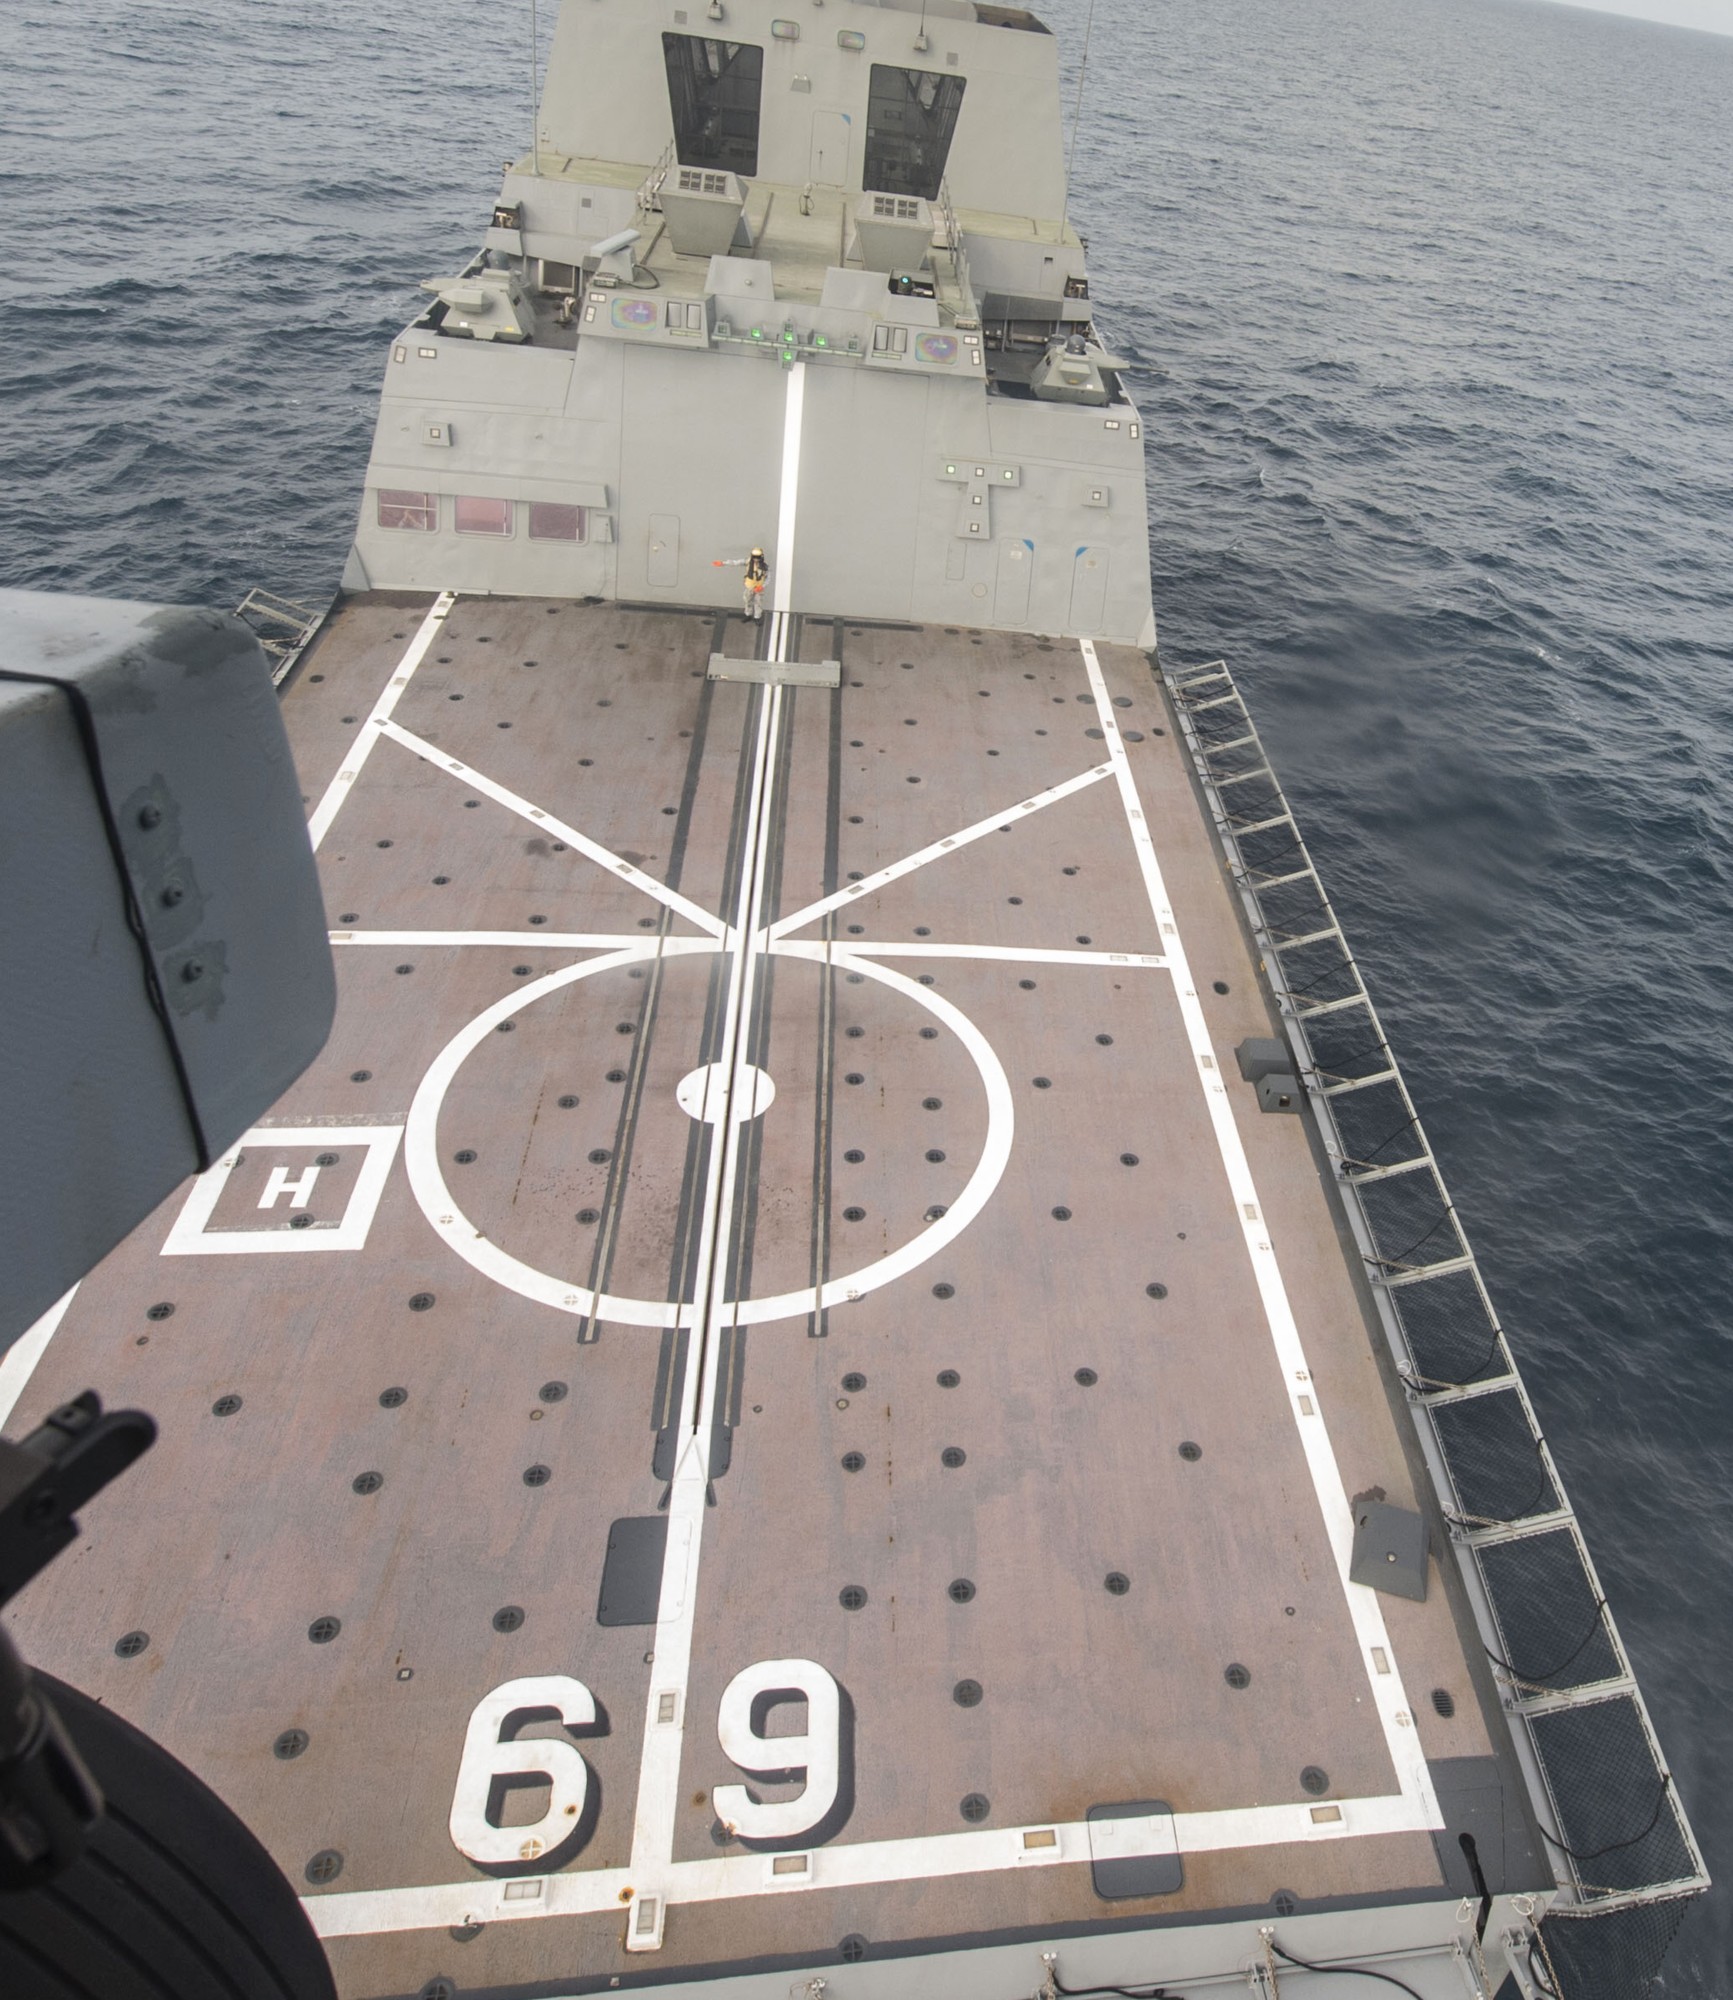 69 rss intrepid formidable class multi-mission missile frigate ffg republic singapore navy helicopter flight deck 13